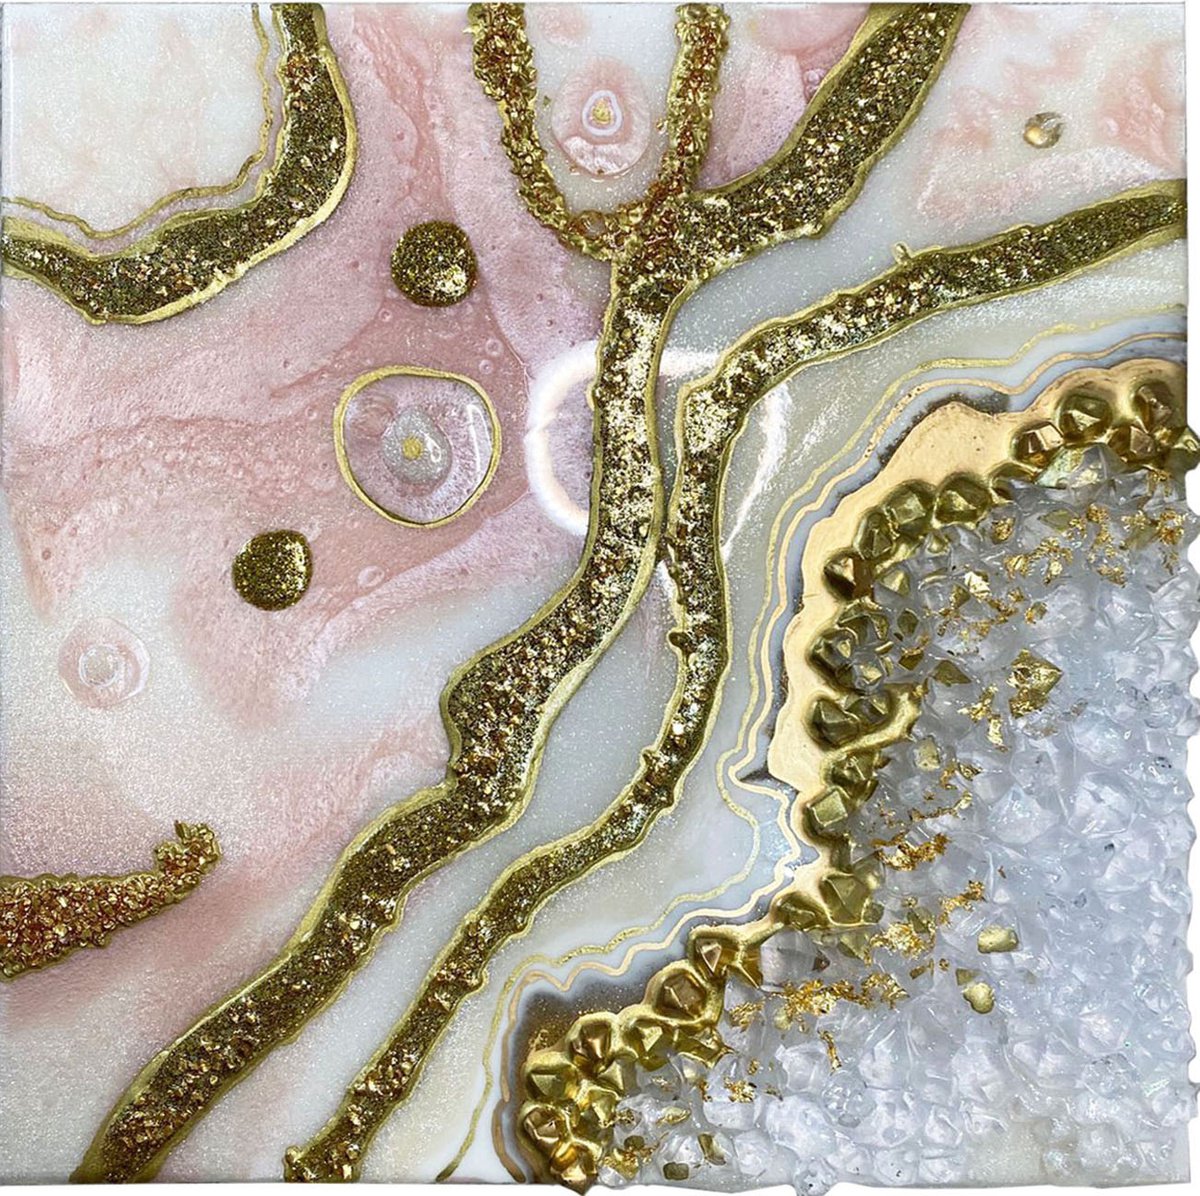 Artistic Decoration Made Of Golden Resin. Epoxy Resin Paint